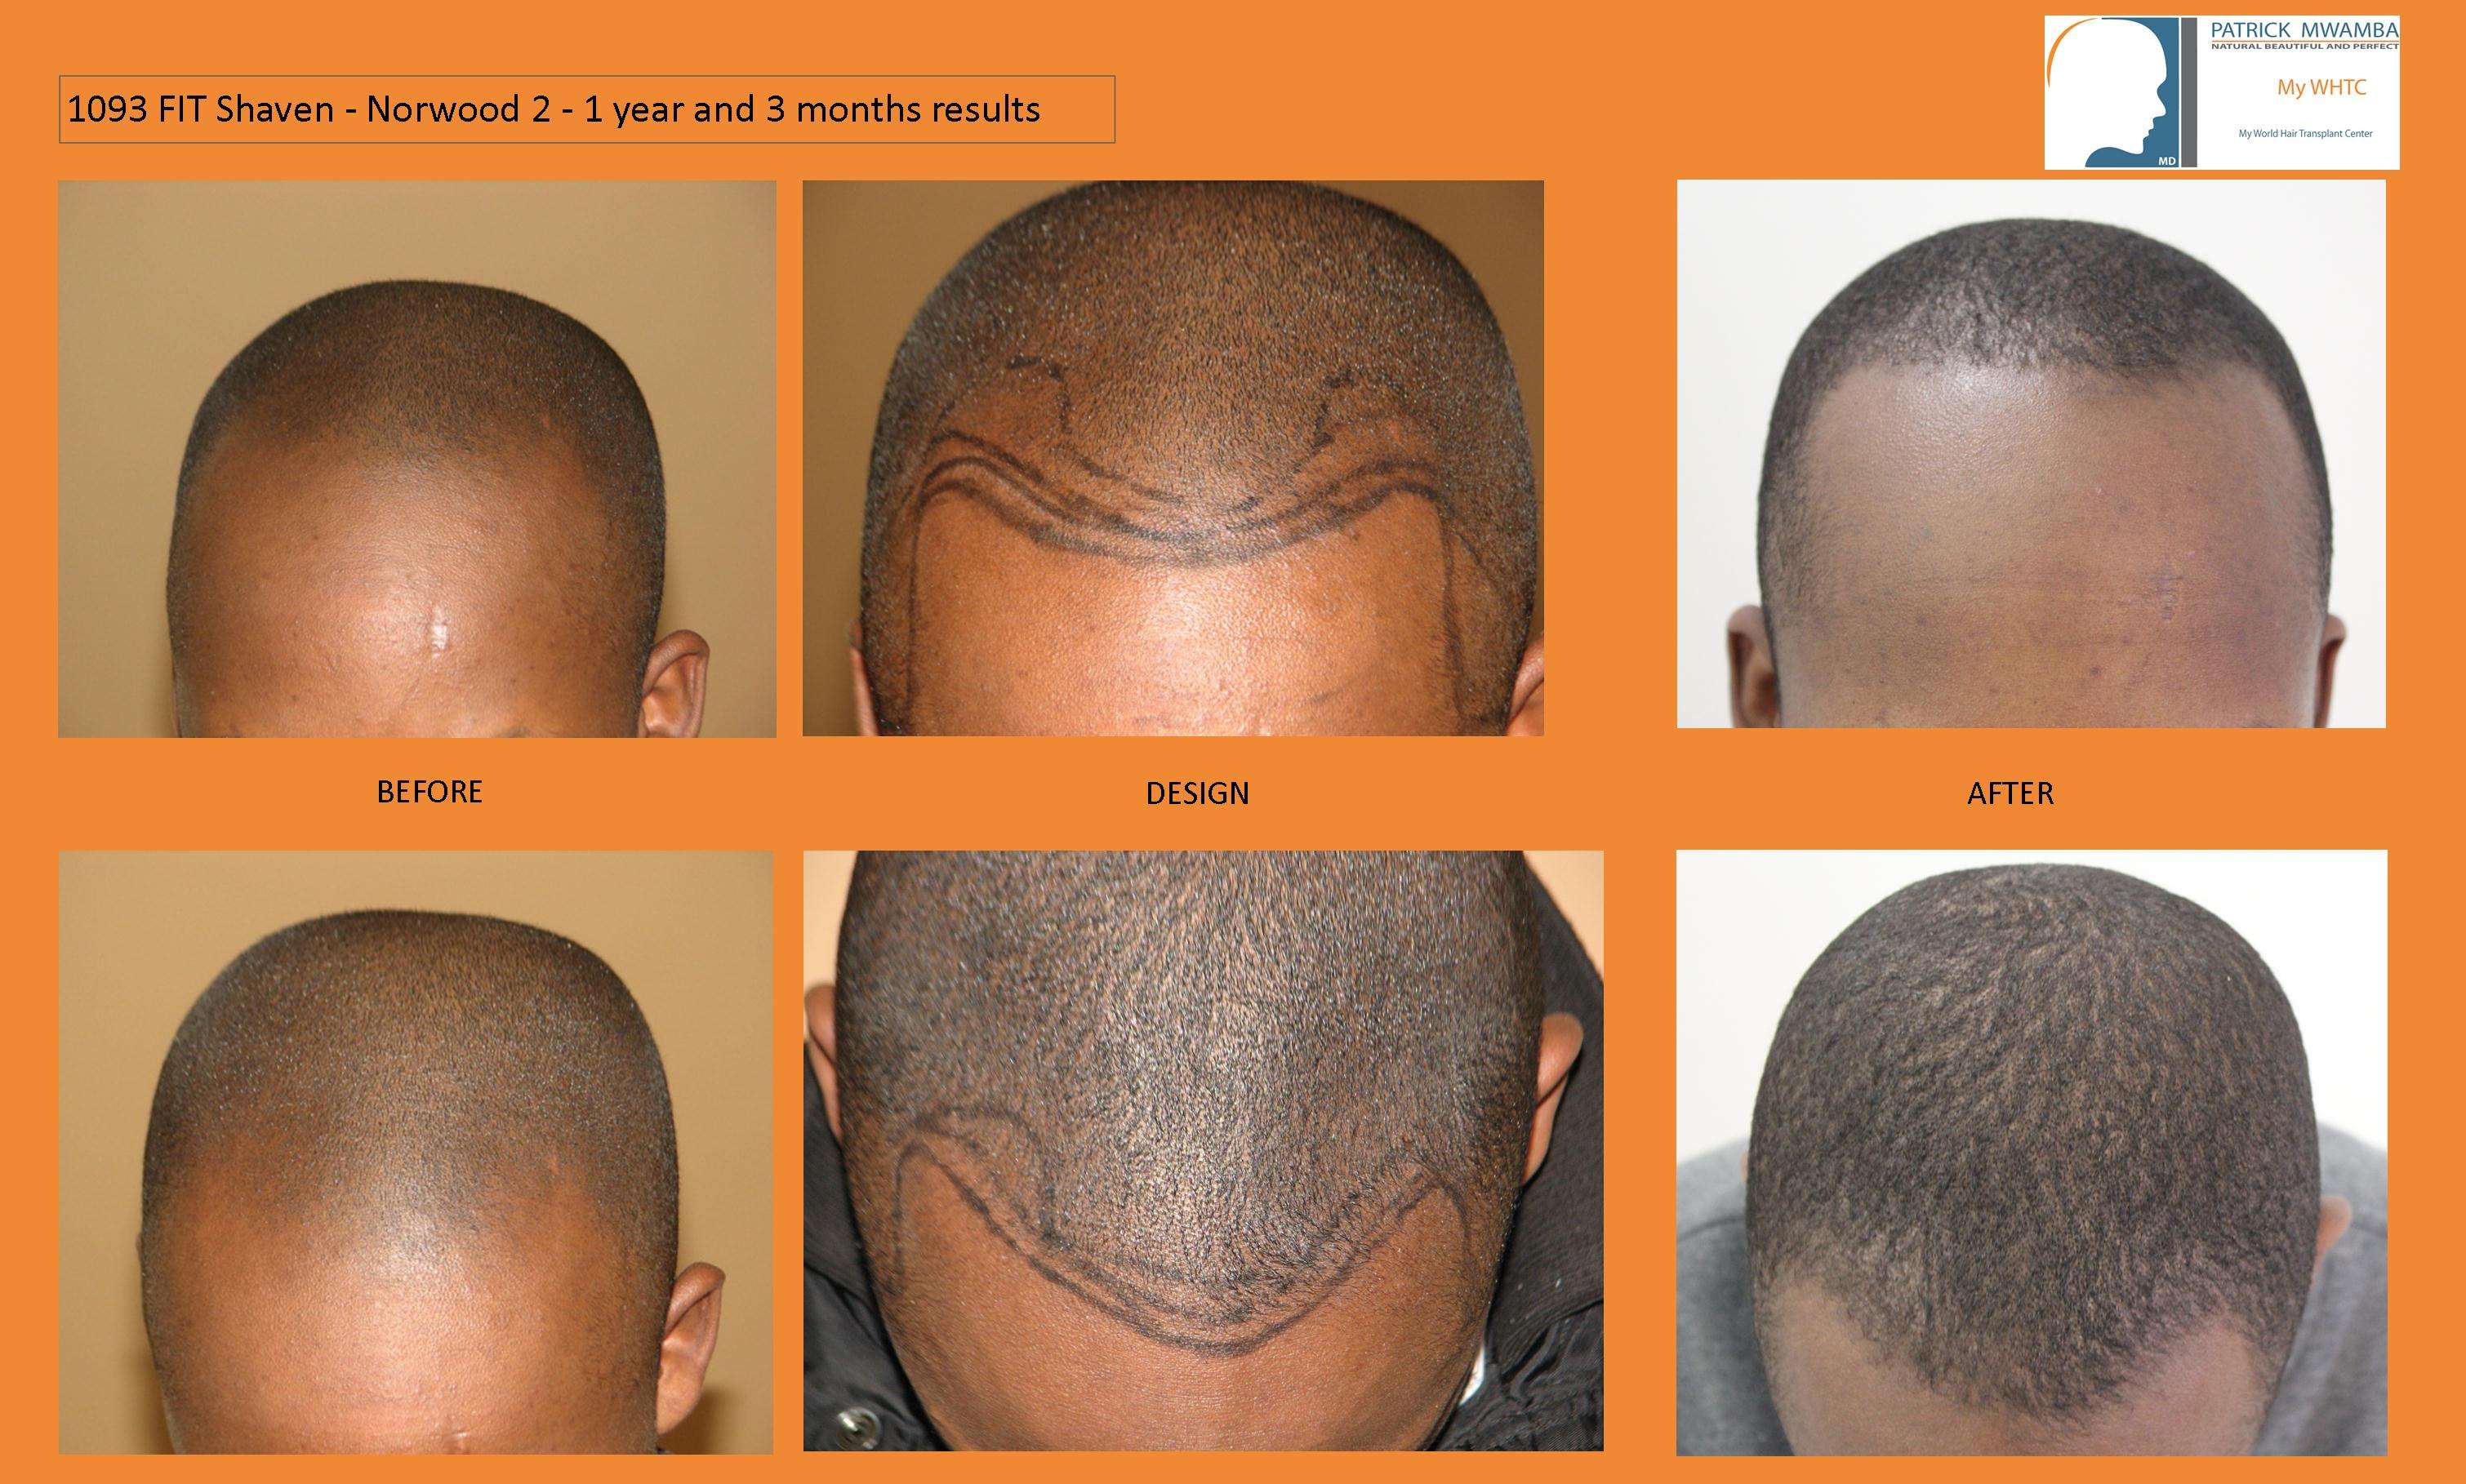 Dr Mwamba - Fit shaven in black patient is quite a challenge. | Hair loss  Forum - Hair Transplant forums